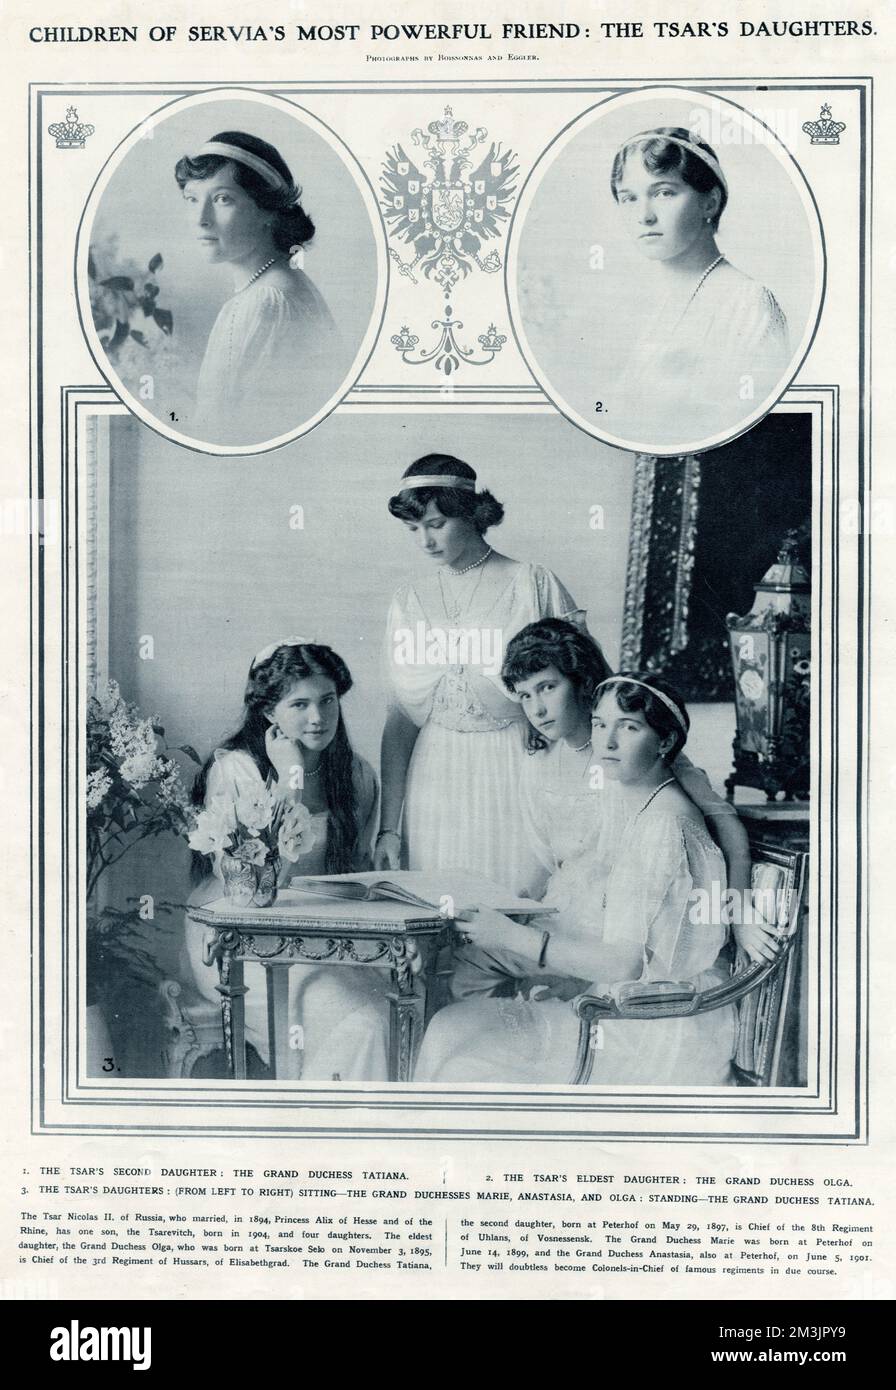 Tsar Nicholas II's four daughters.  The bottom photograph shows from left to right; Marie, Tatiana, Anastasia and Olga.  The top left portrait shows Tatiana and the top right, Olga.  Following their fathers renouncement of the Russian throne in 1917, they were executed by Bolsheviks in July 1918 along with their mother, father and brother, the Tsarevitch.  1914 Stock Photo